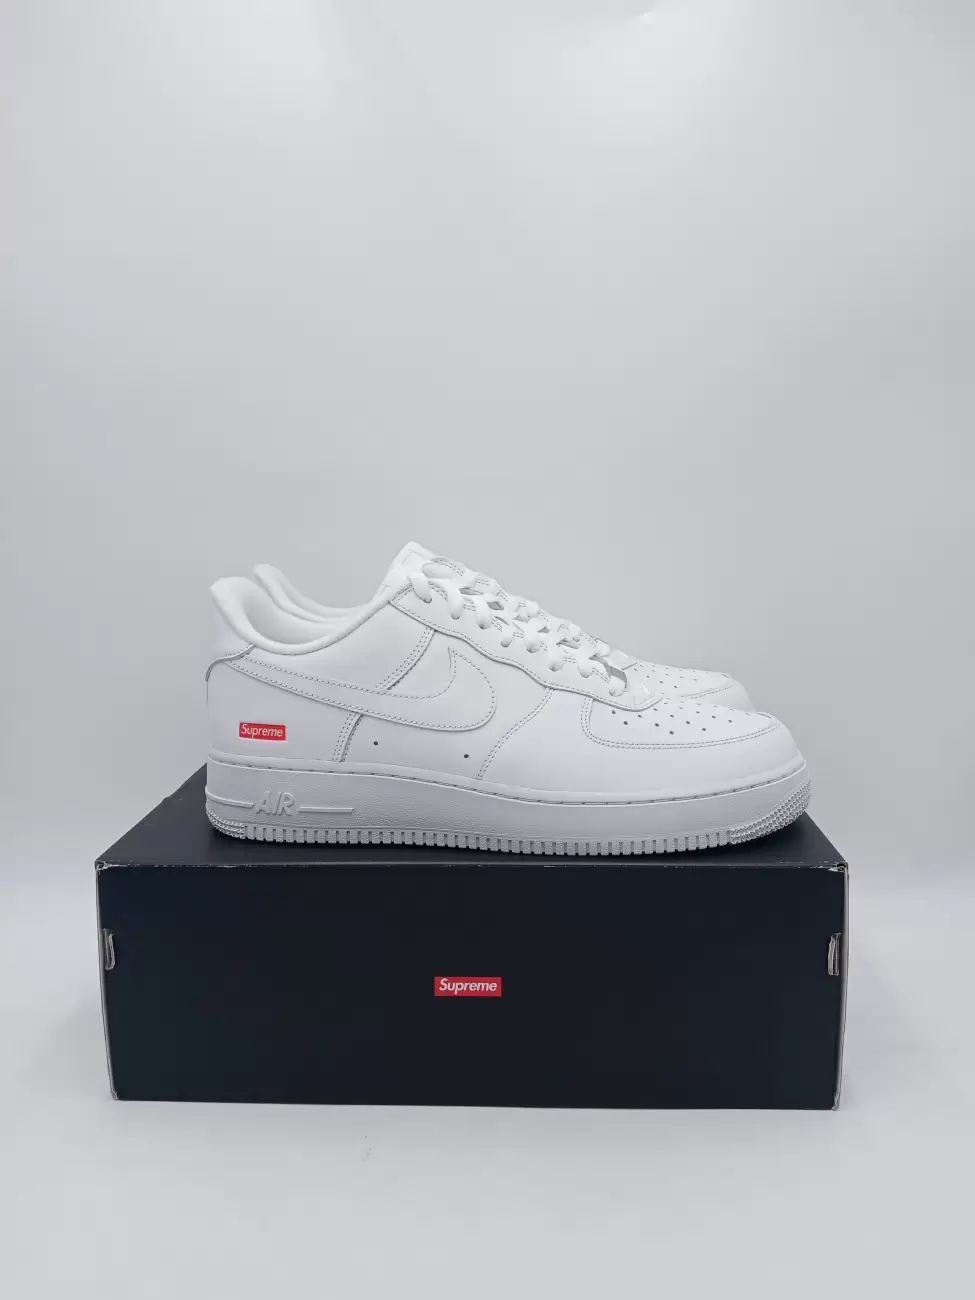 Nike Air Force 1 Low Supreme White | AfterMarket